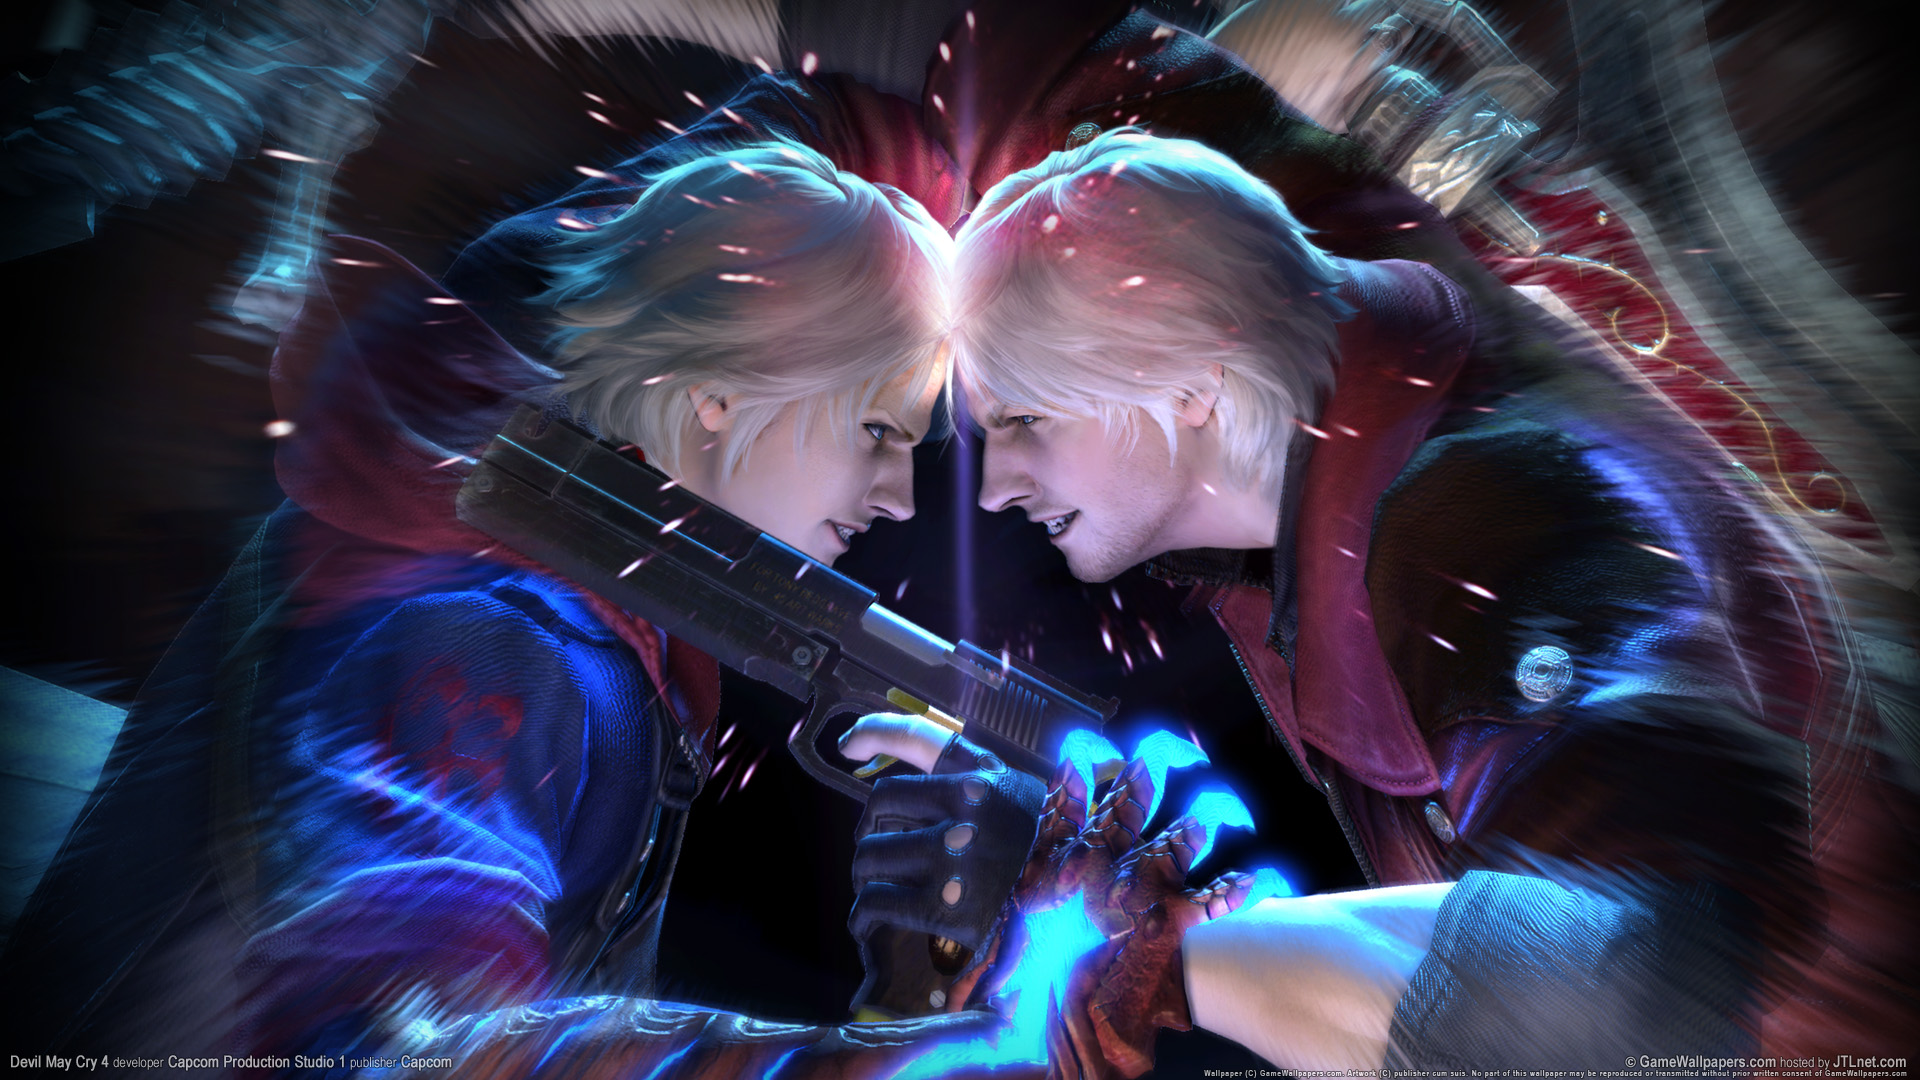 73+] Devil May Cry Backgrounds - WallpaperSafari